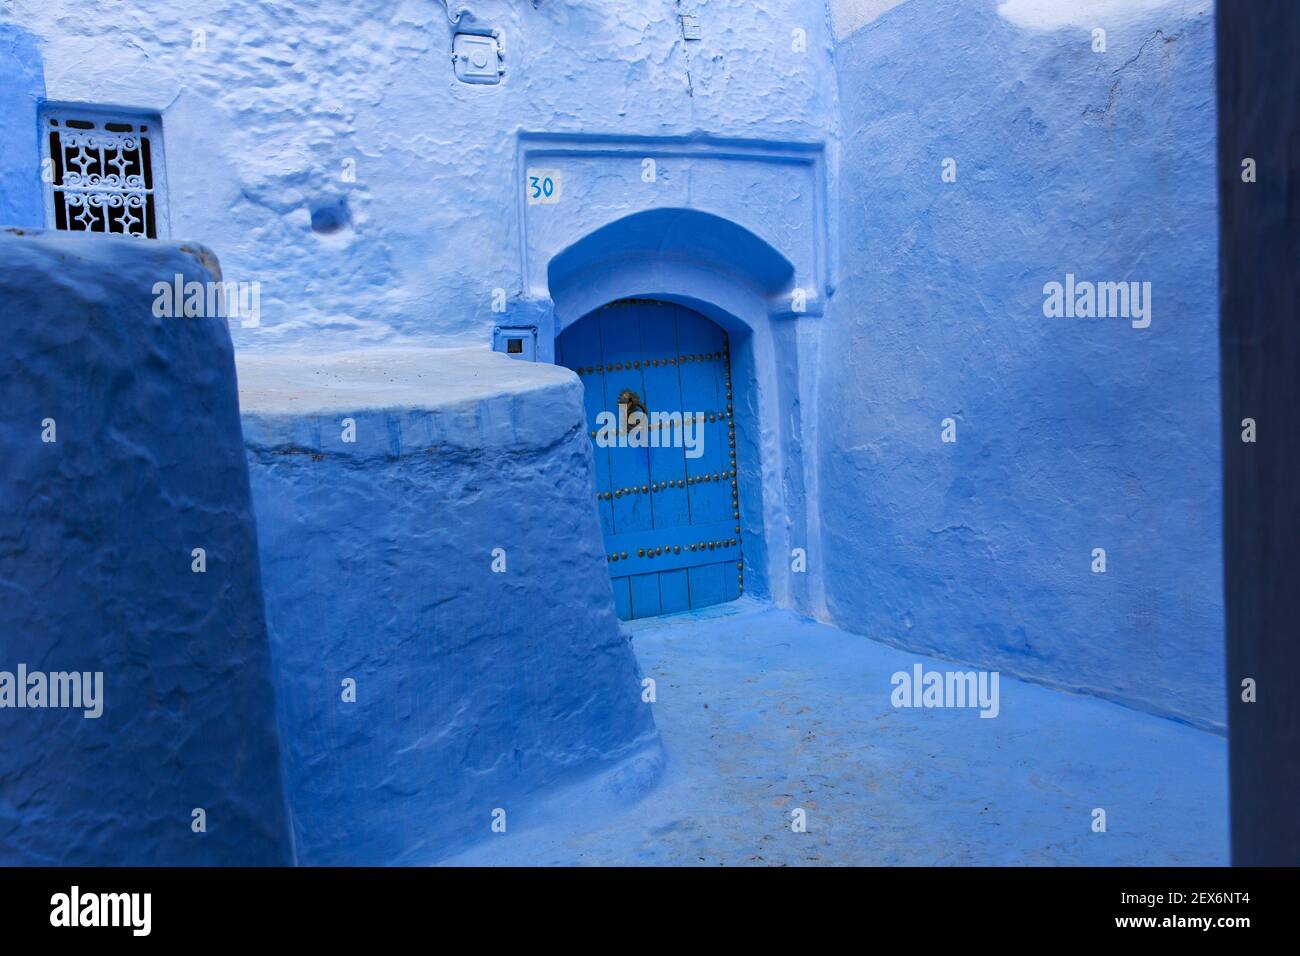 Morocco,Chefchaouen, architecture of white and indigo limewashed buildings Stock Photo